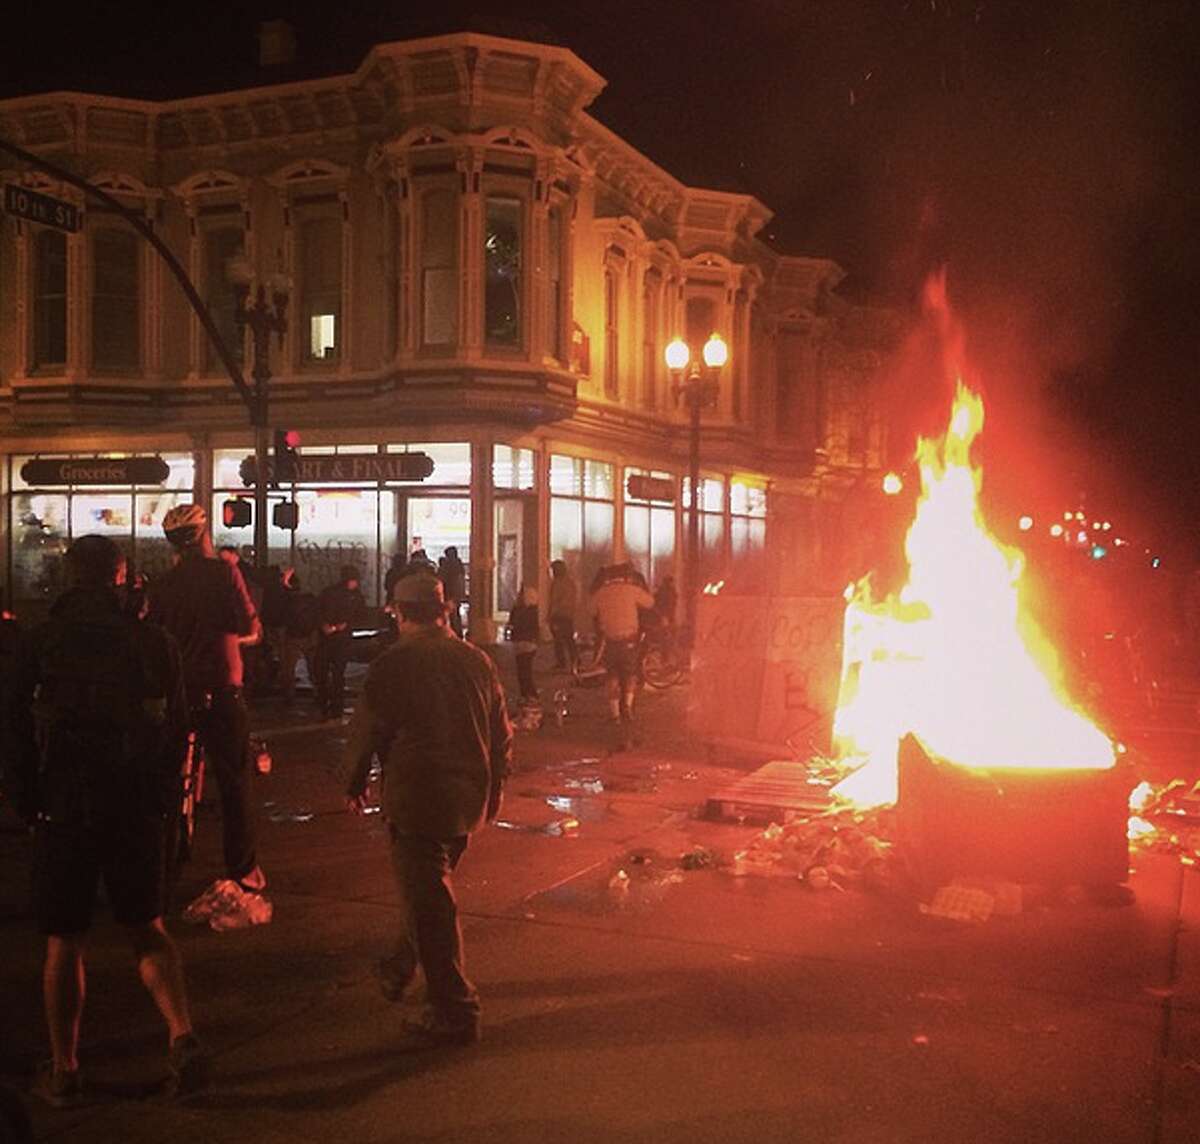 A fire burns in the middle of the street in front of a building being looted by protesters in downtown Oakland early on Tuesday, Nov. 25, 2014. 